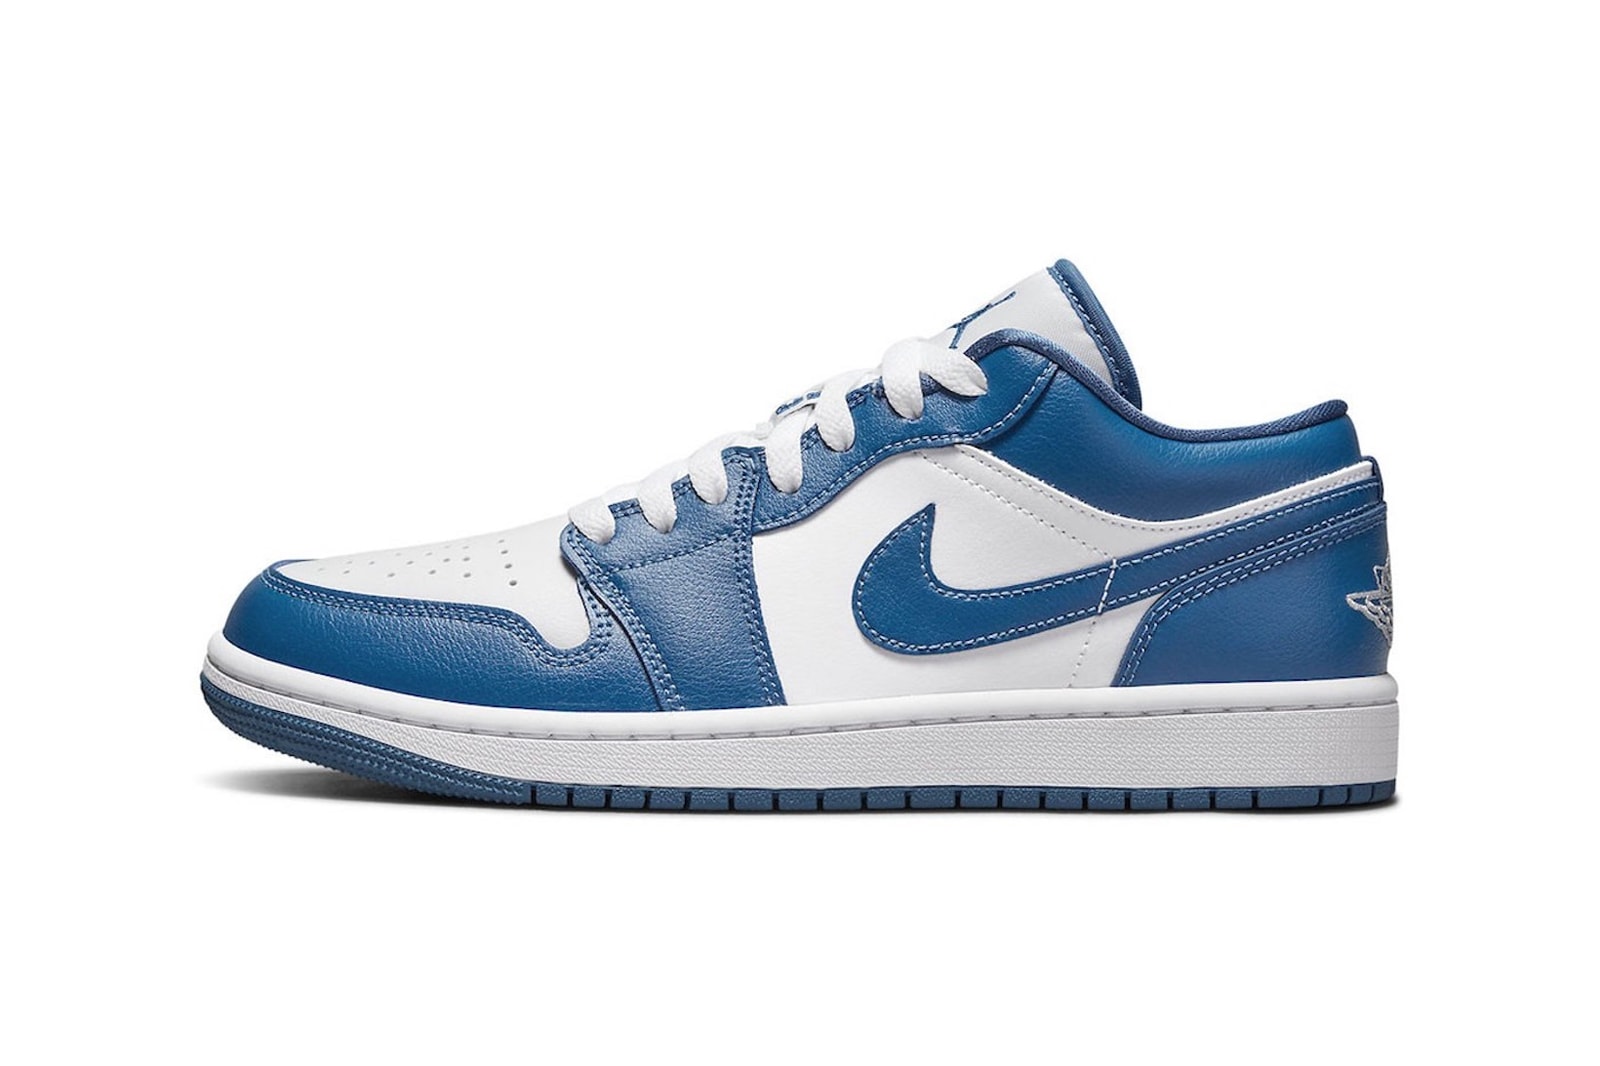 The 9 Best Air Jordan 1s to Shop This Winter |